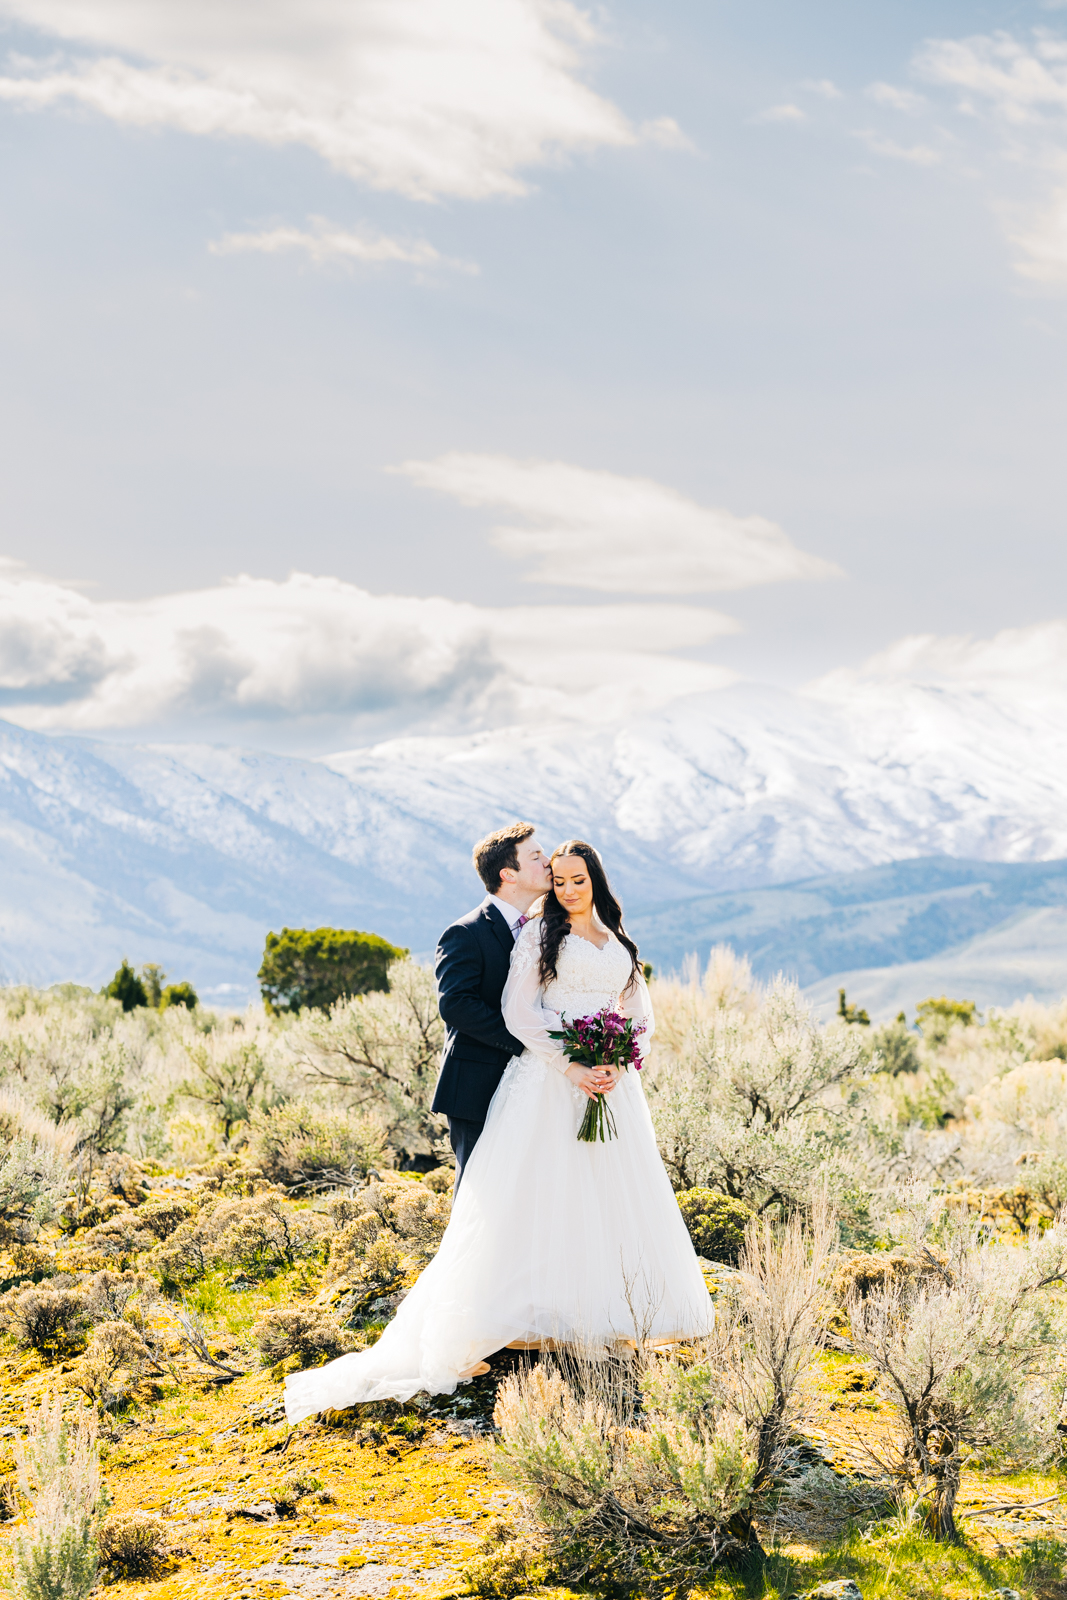 Jackson Hole wedding photographer captures bride and groom embracing in a field in the Tetons 